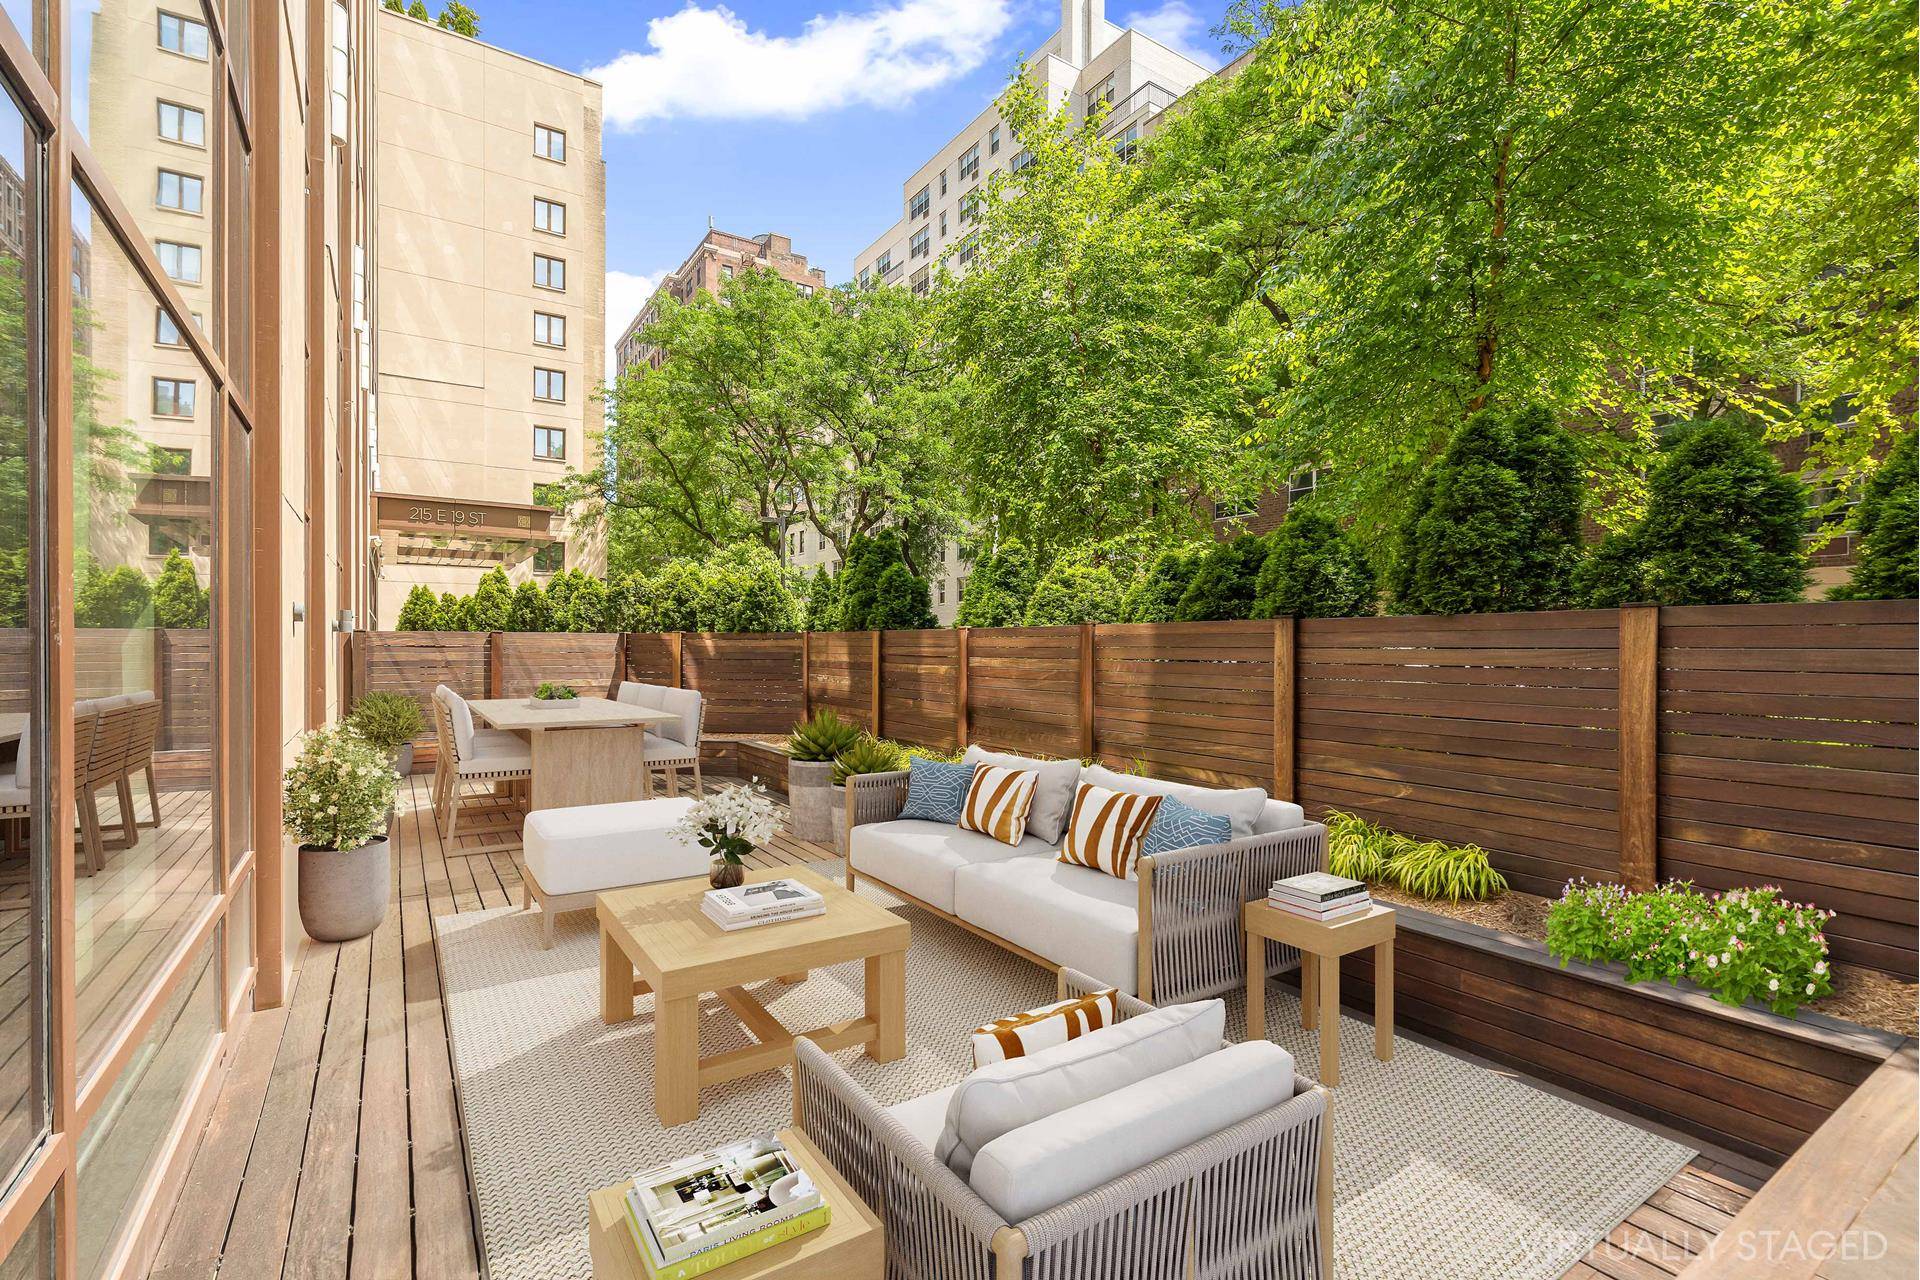 Residence 1B provides a rare chance to enjoy everything Gramercy Square has to offer.